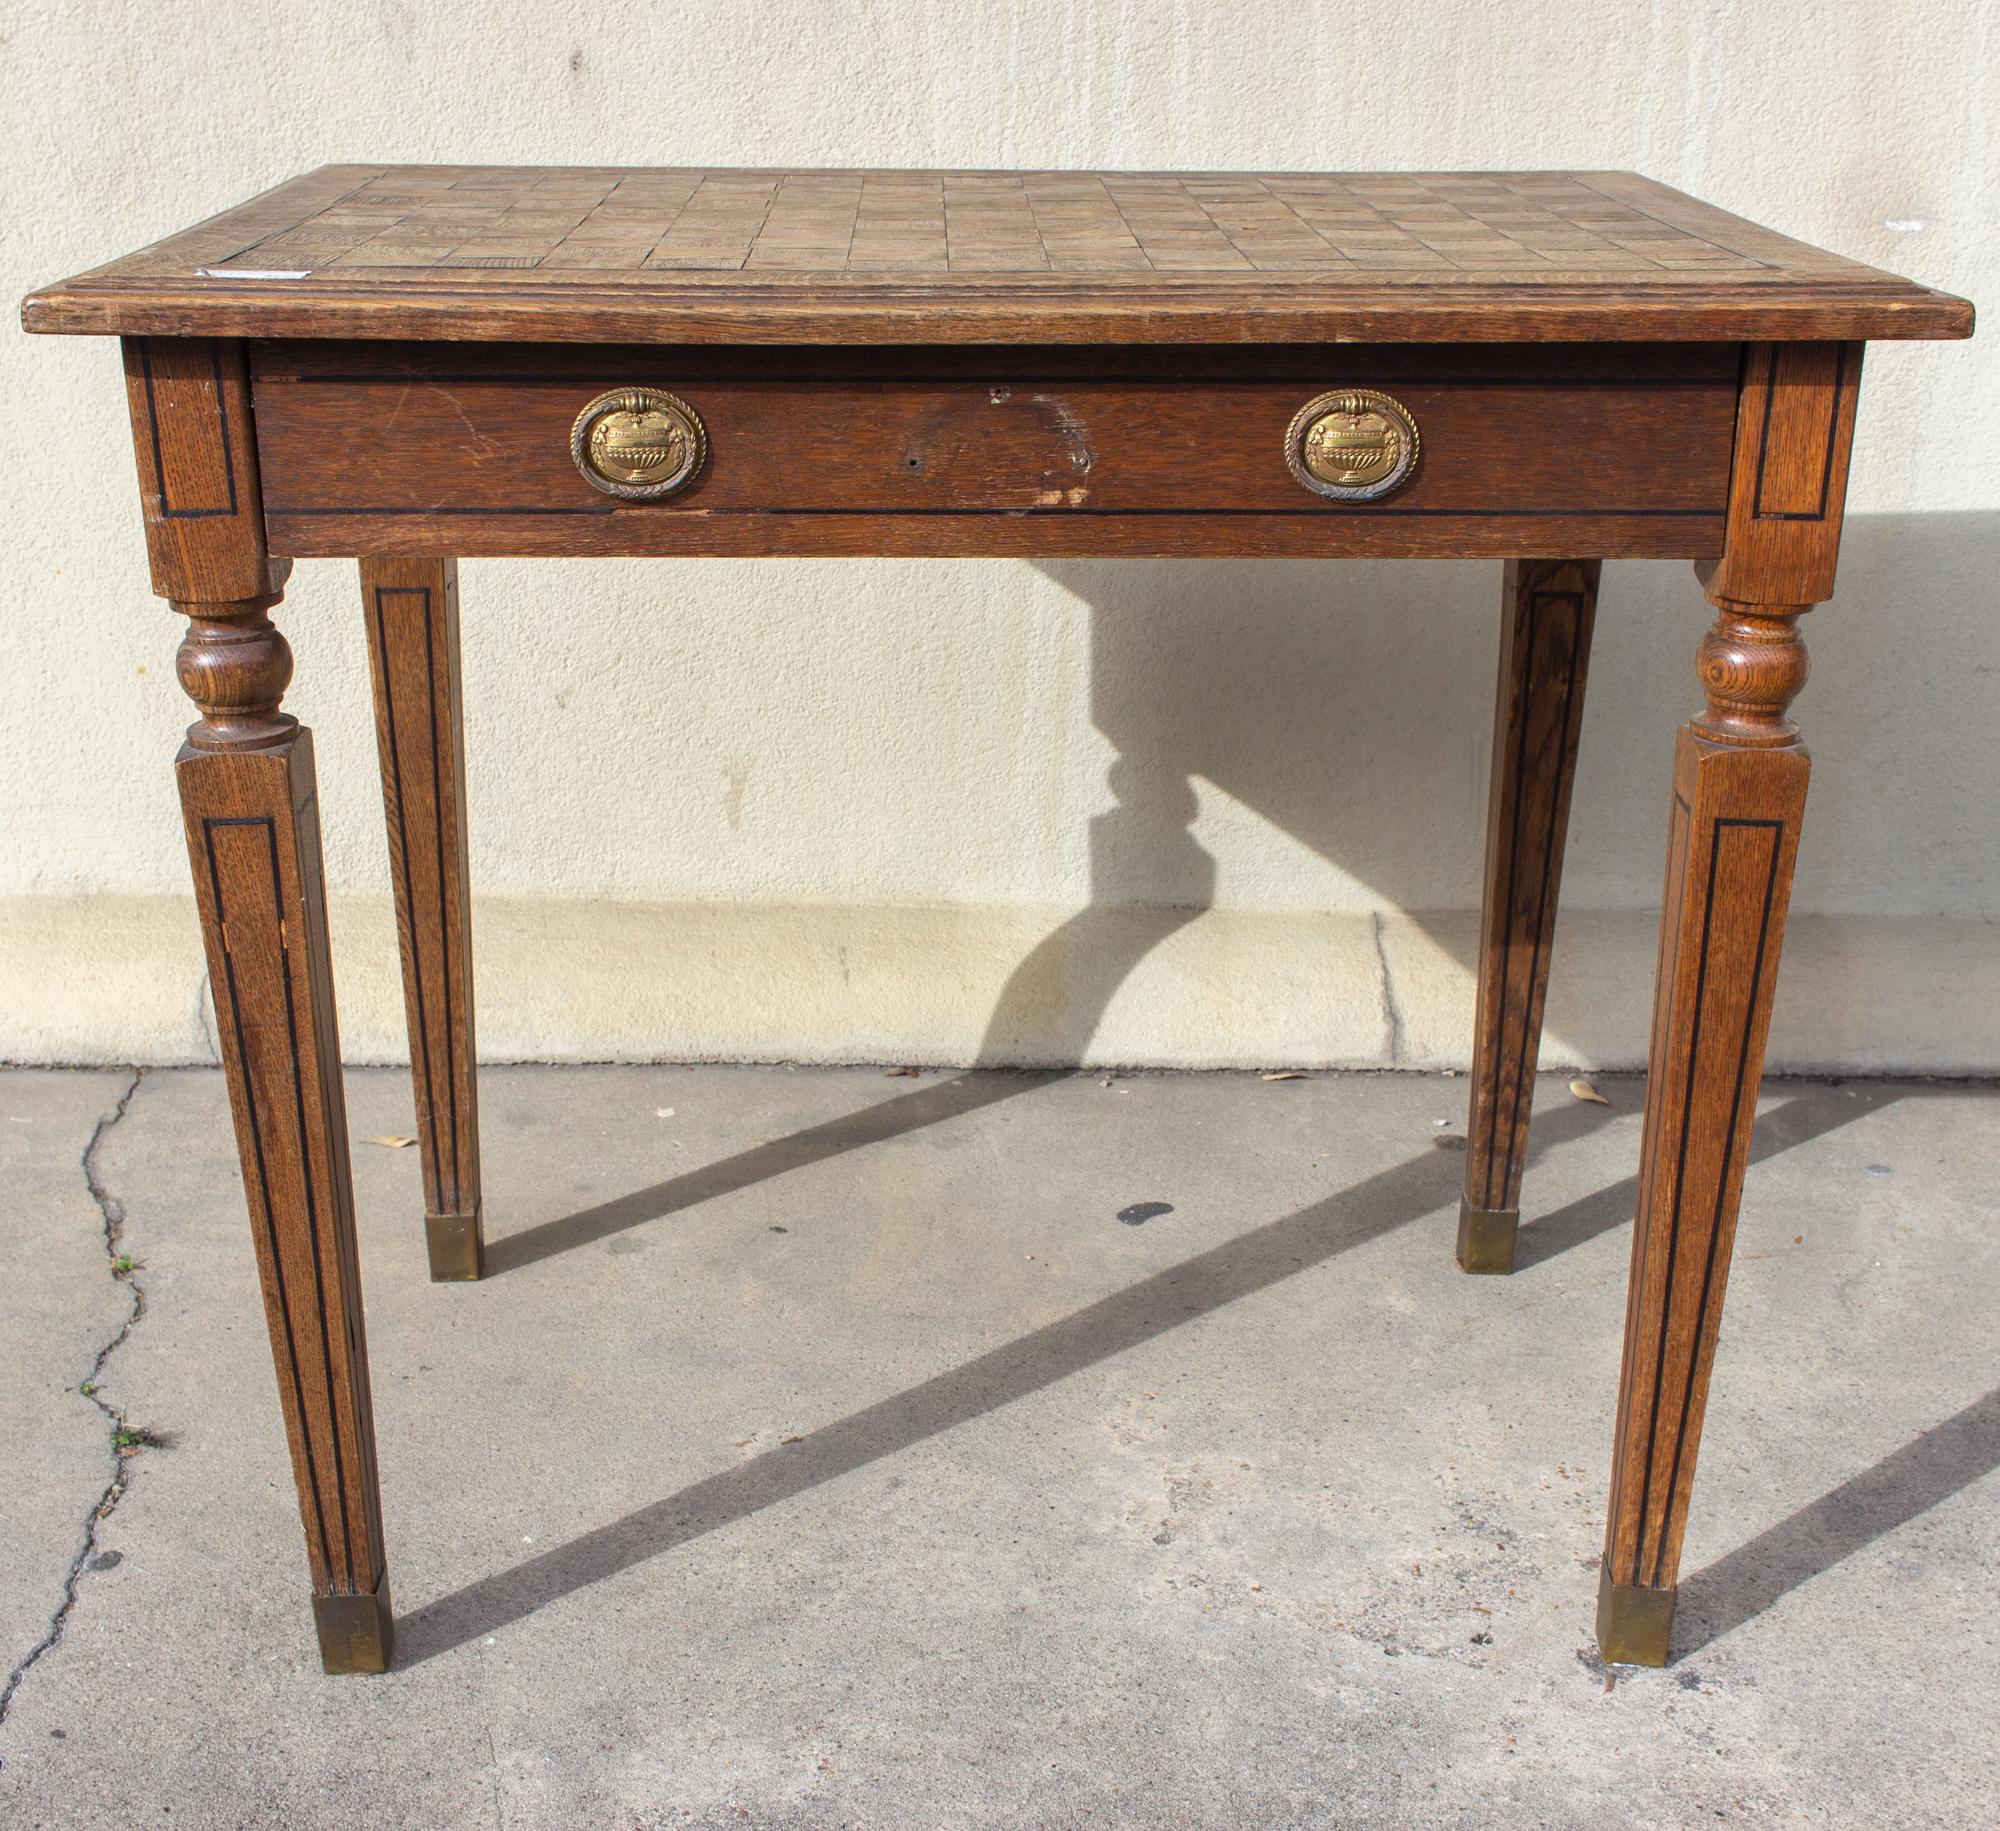 Parquetry 1920s French Parquet Top Desk with Drawer and Brass Details